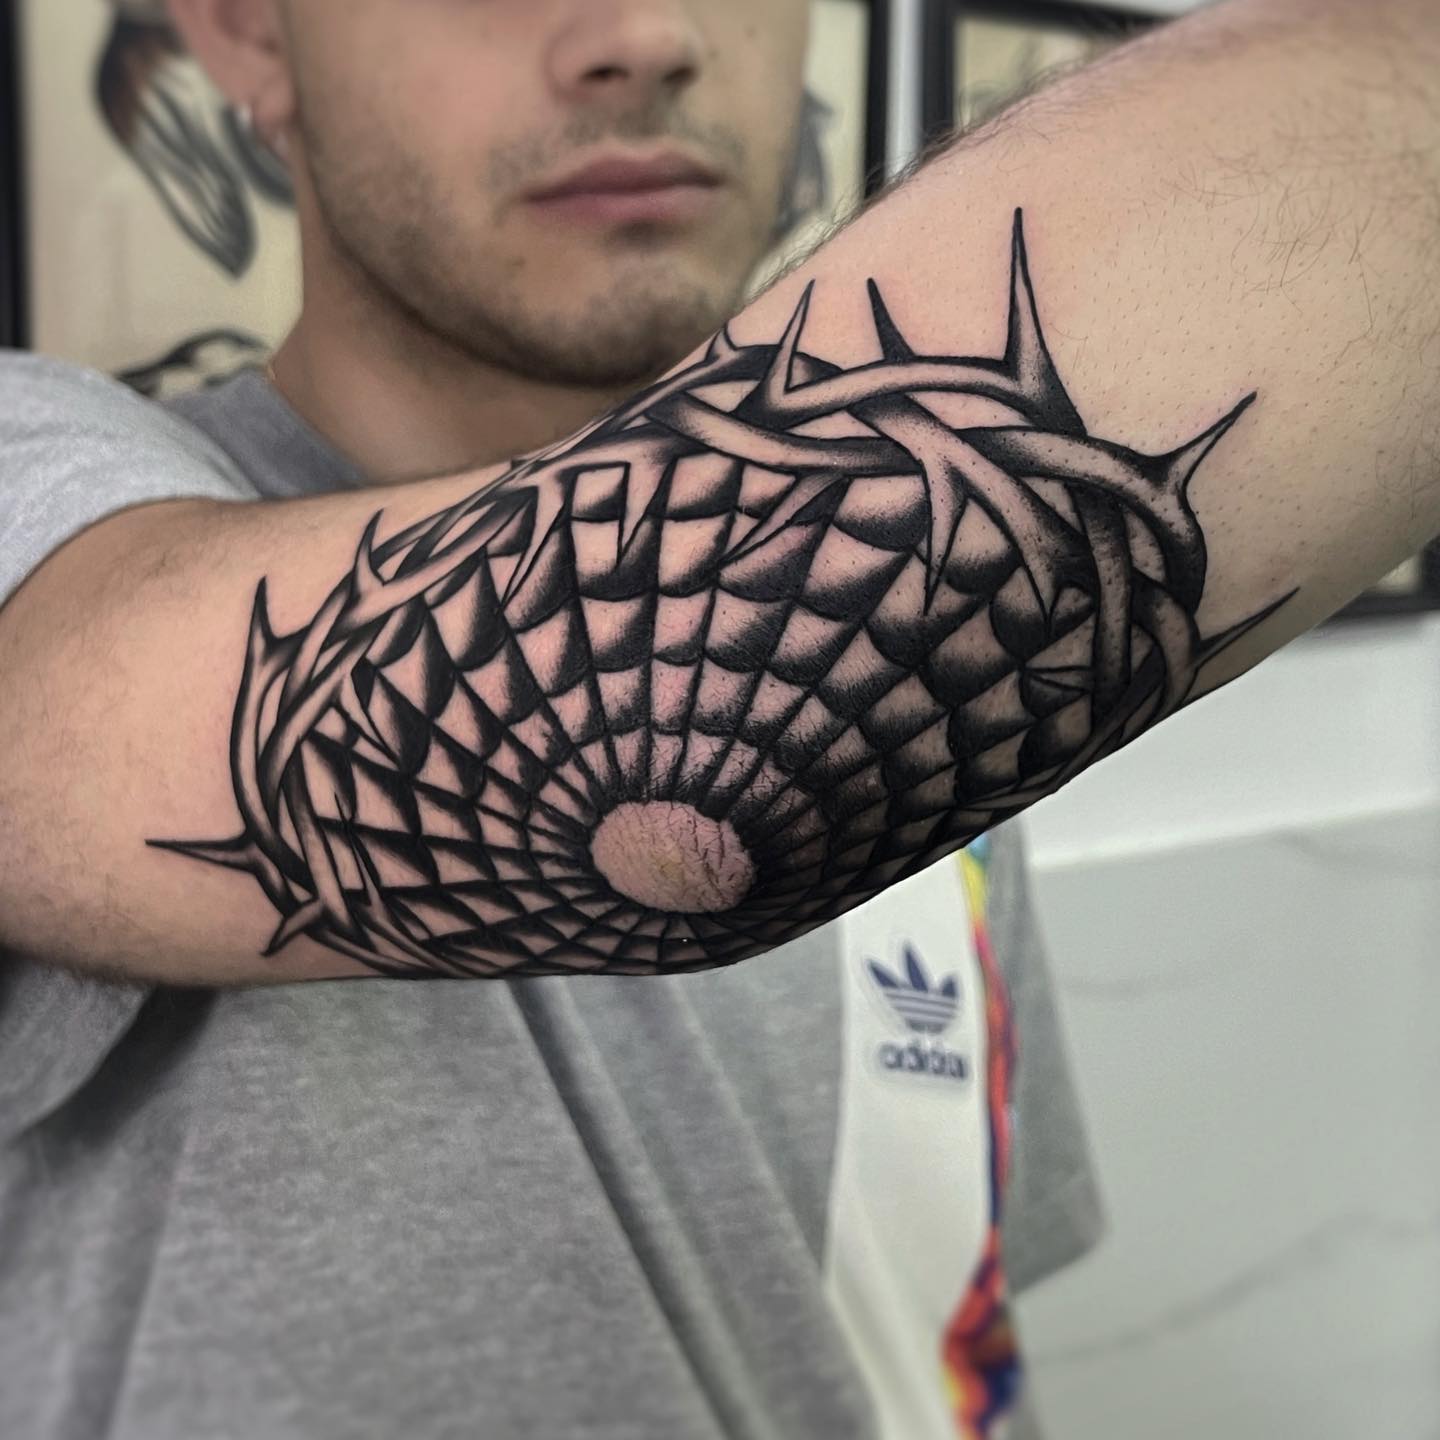 This spider web tattoo will be tricky to get due to its elbow placement. Do you fancy something wild and different?